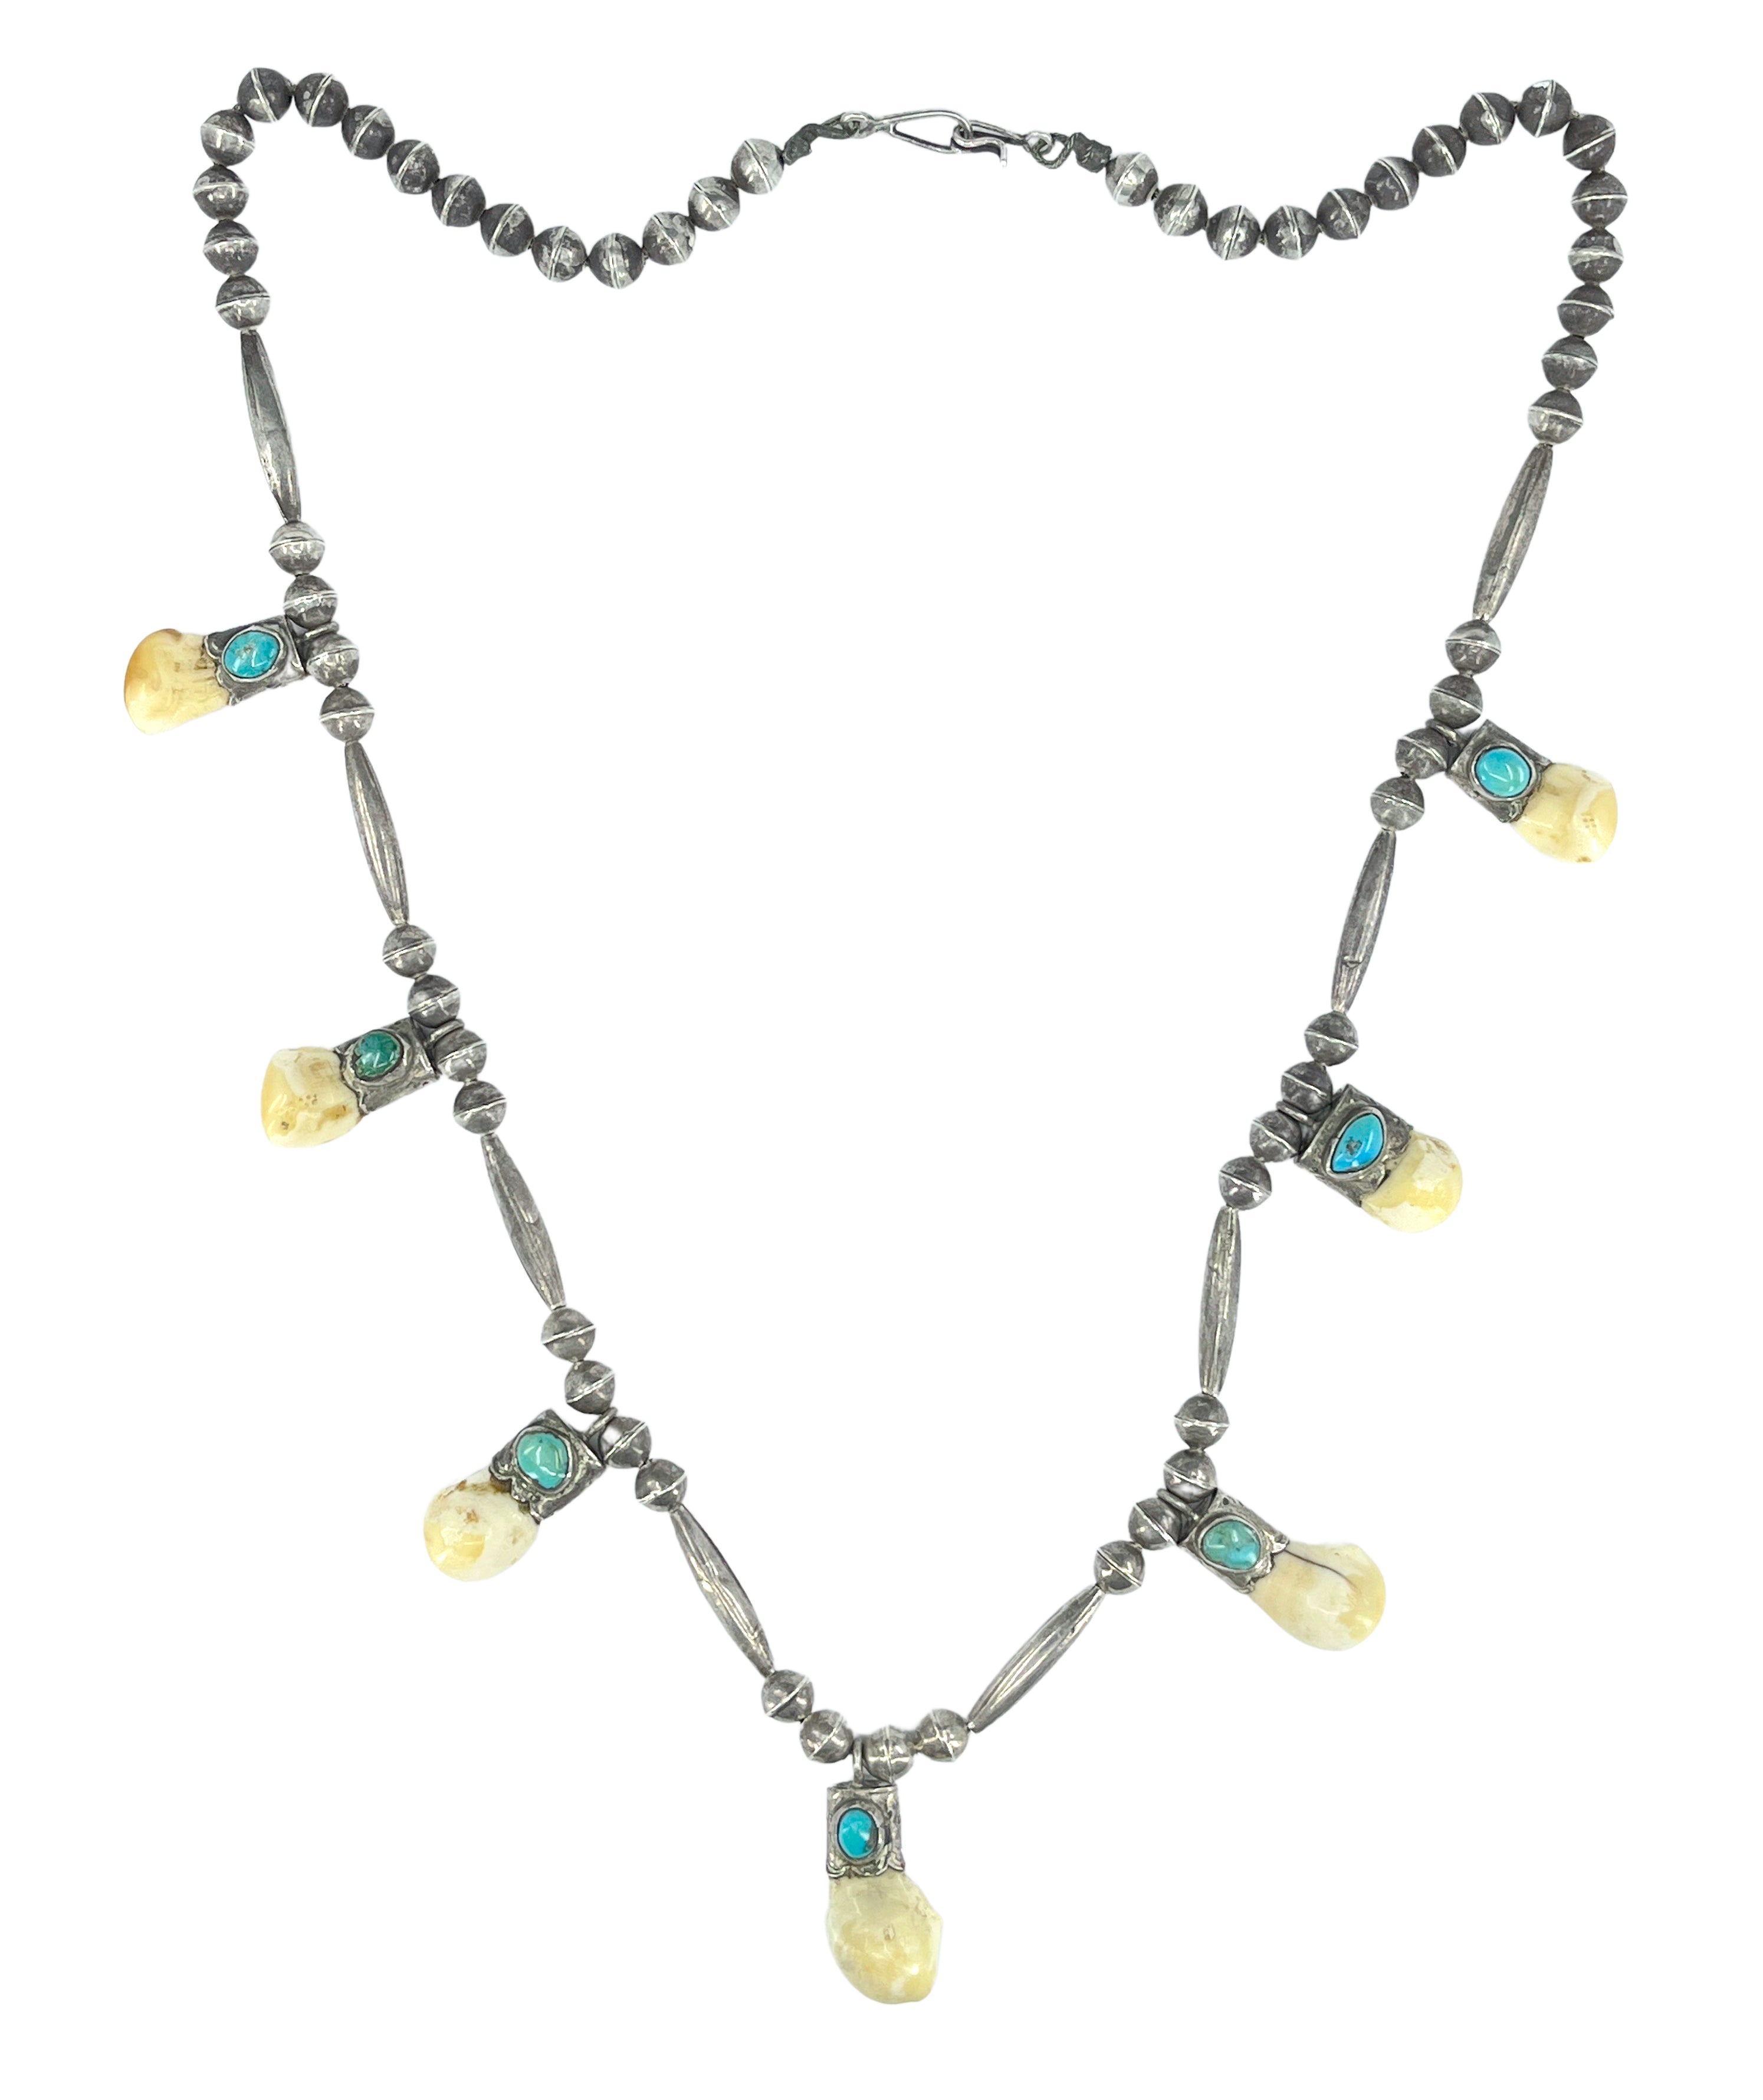 Native American Black Onyx Squash Blossom Necklace and Earrings Set | Kee Cook